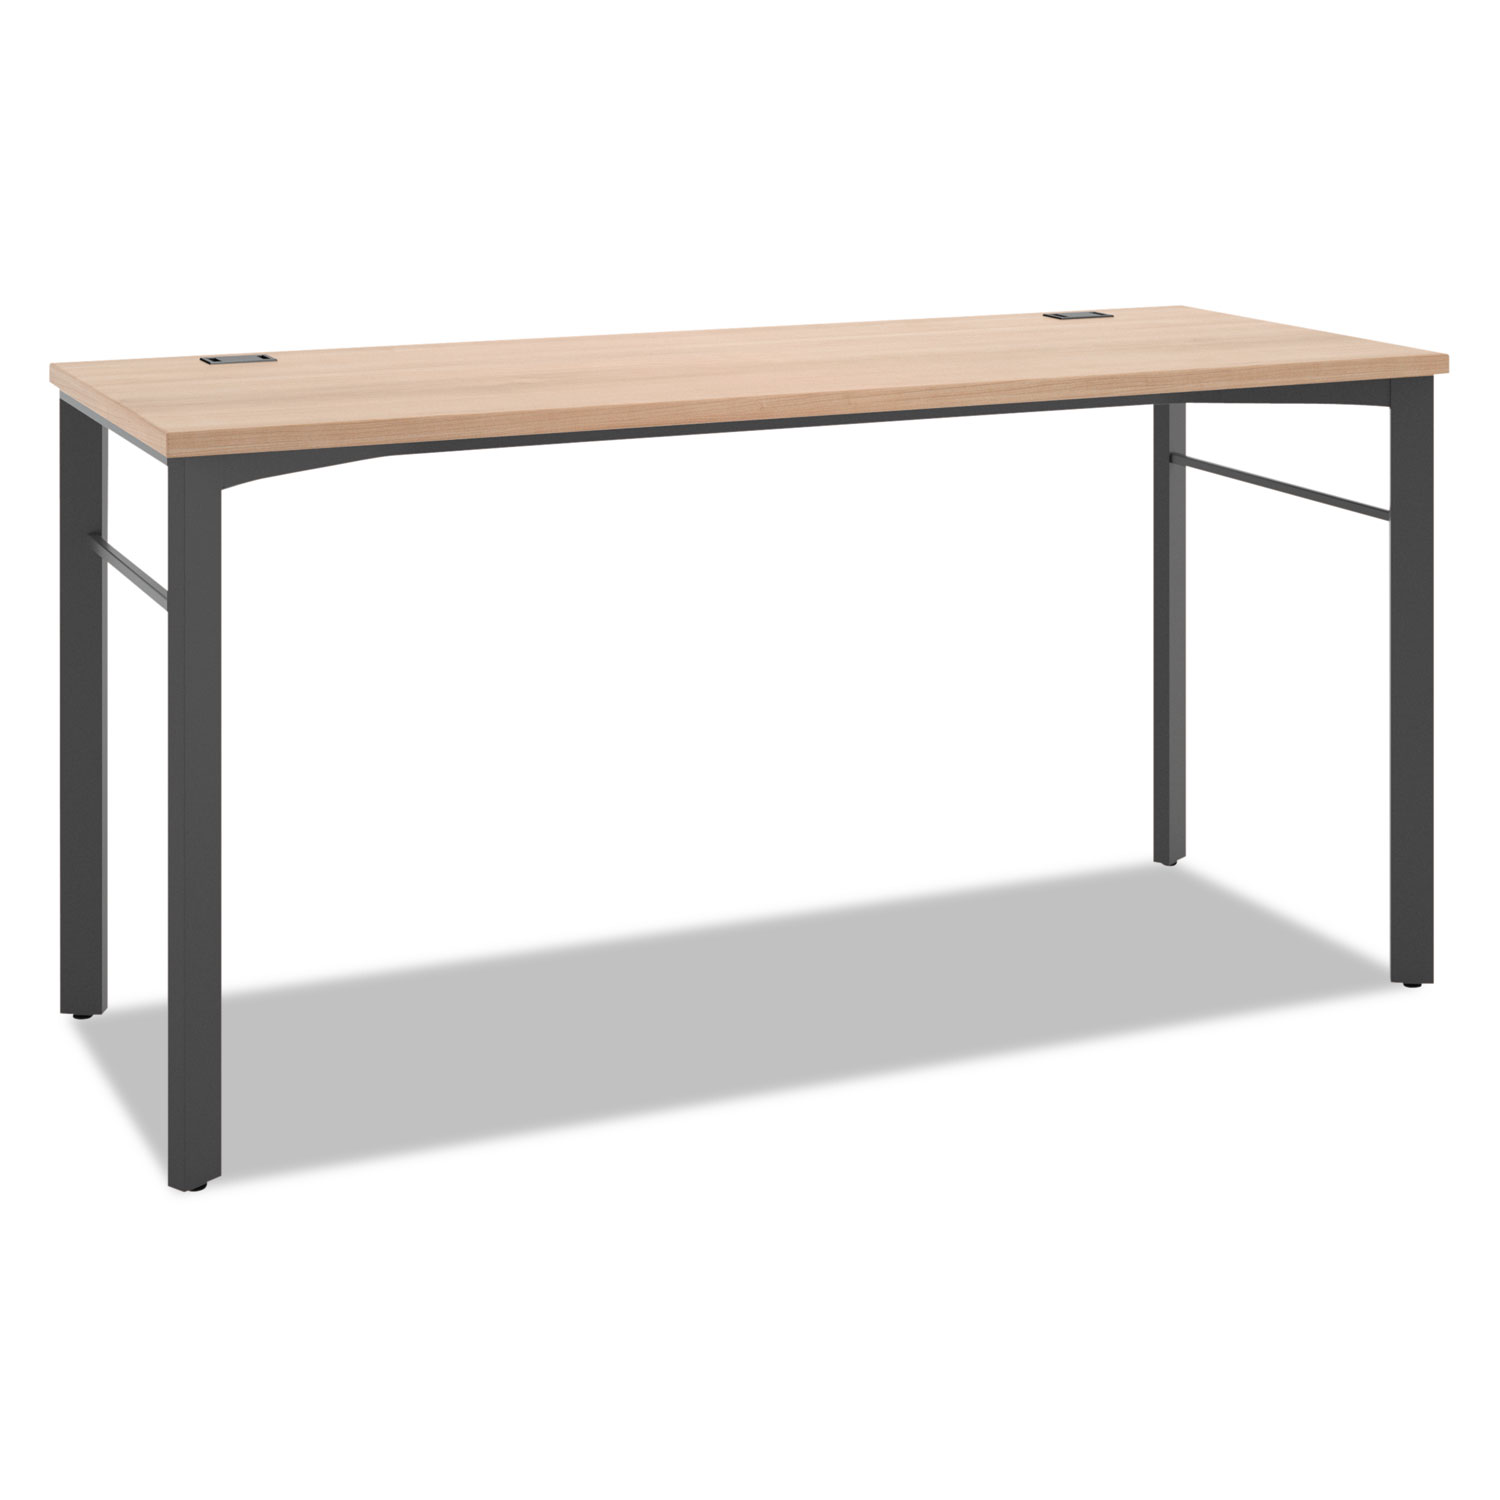 Manage Series Desk Table, 60w x 23 1/2d x 29 1/2h, Wheat